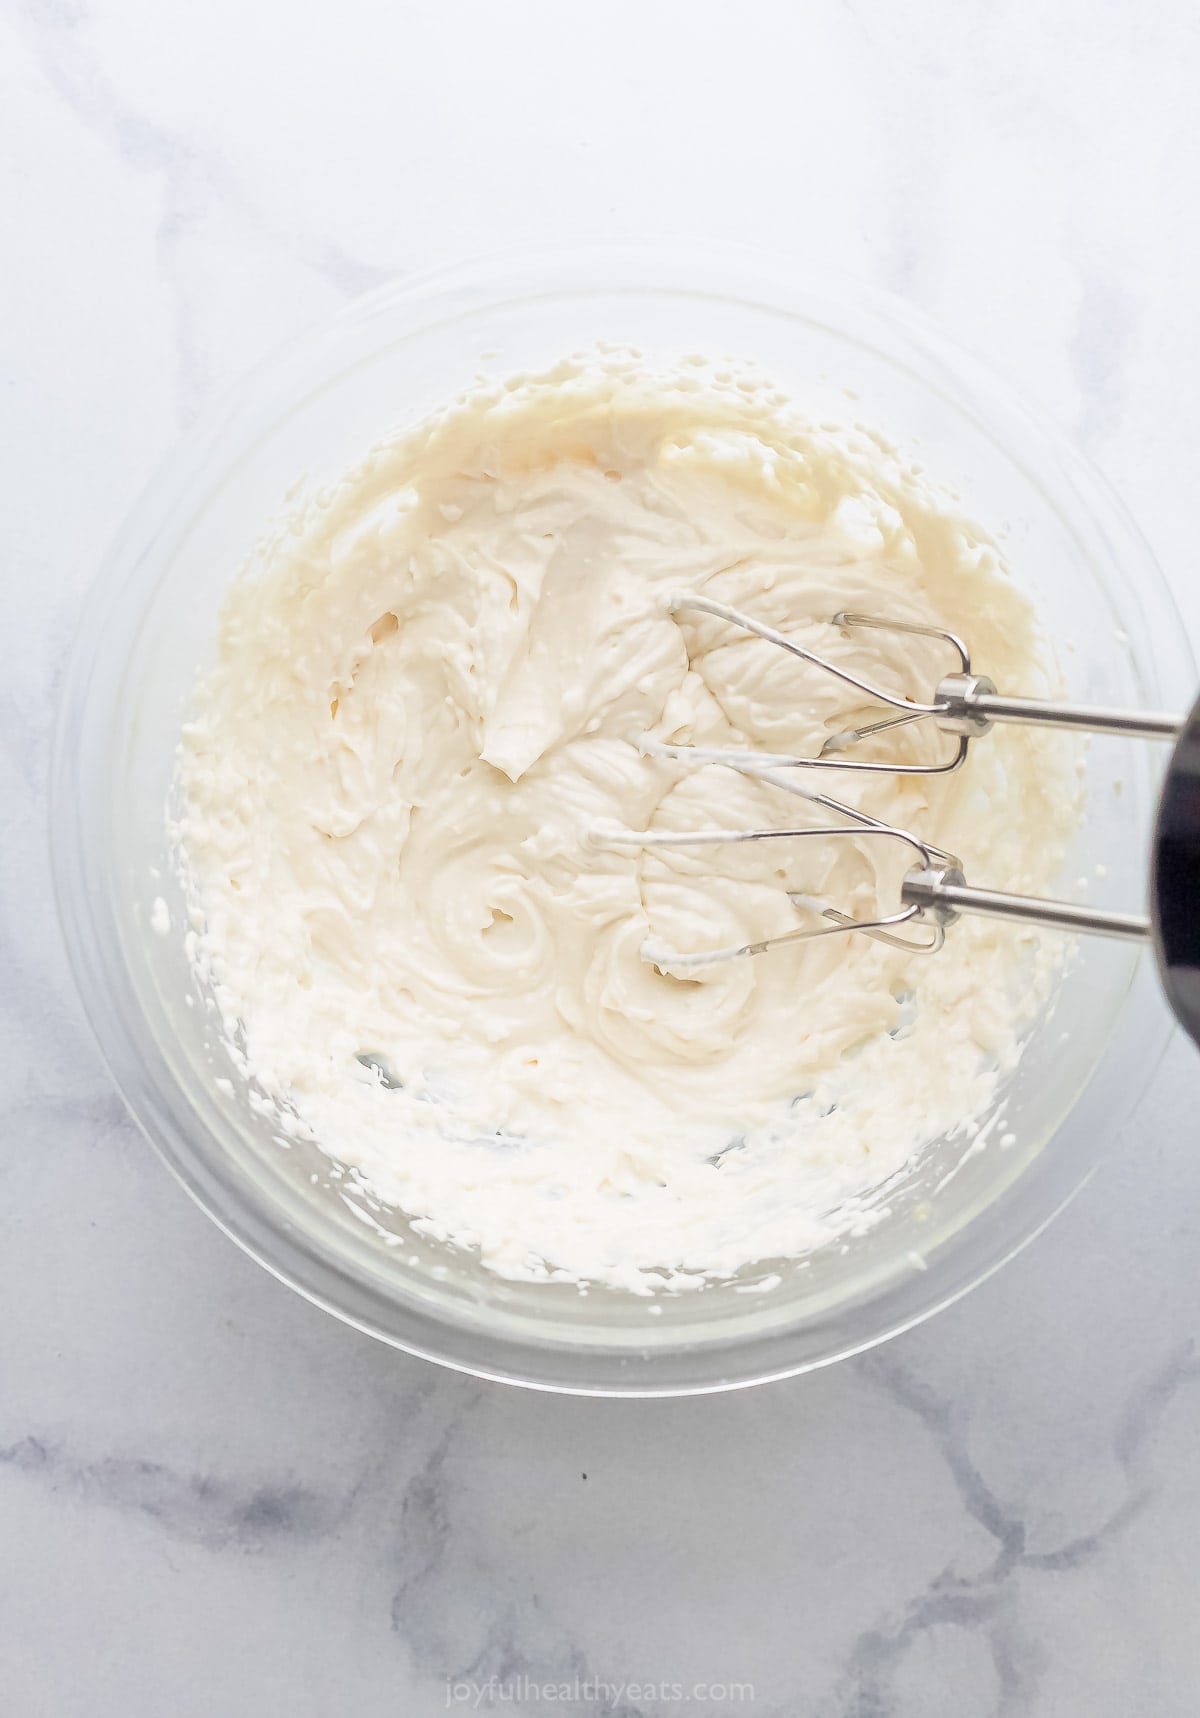 Beat the cream cheese frosting. 